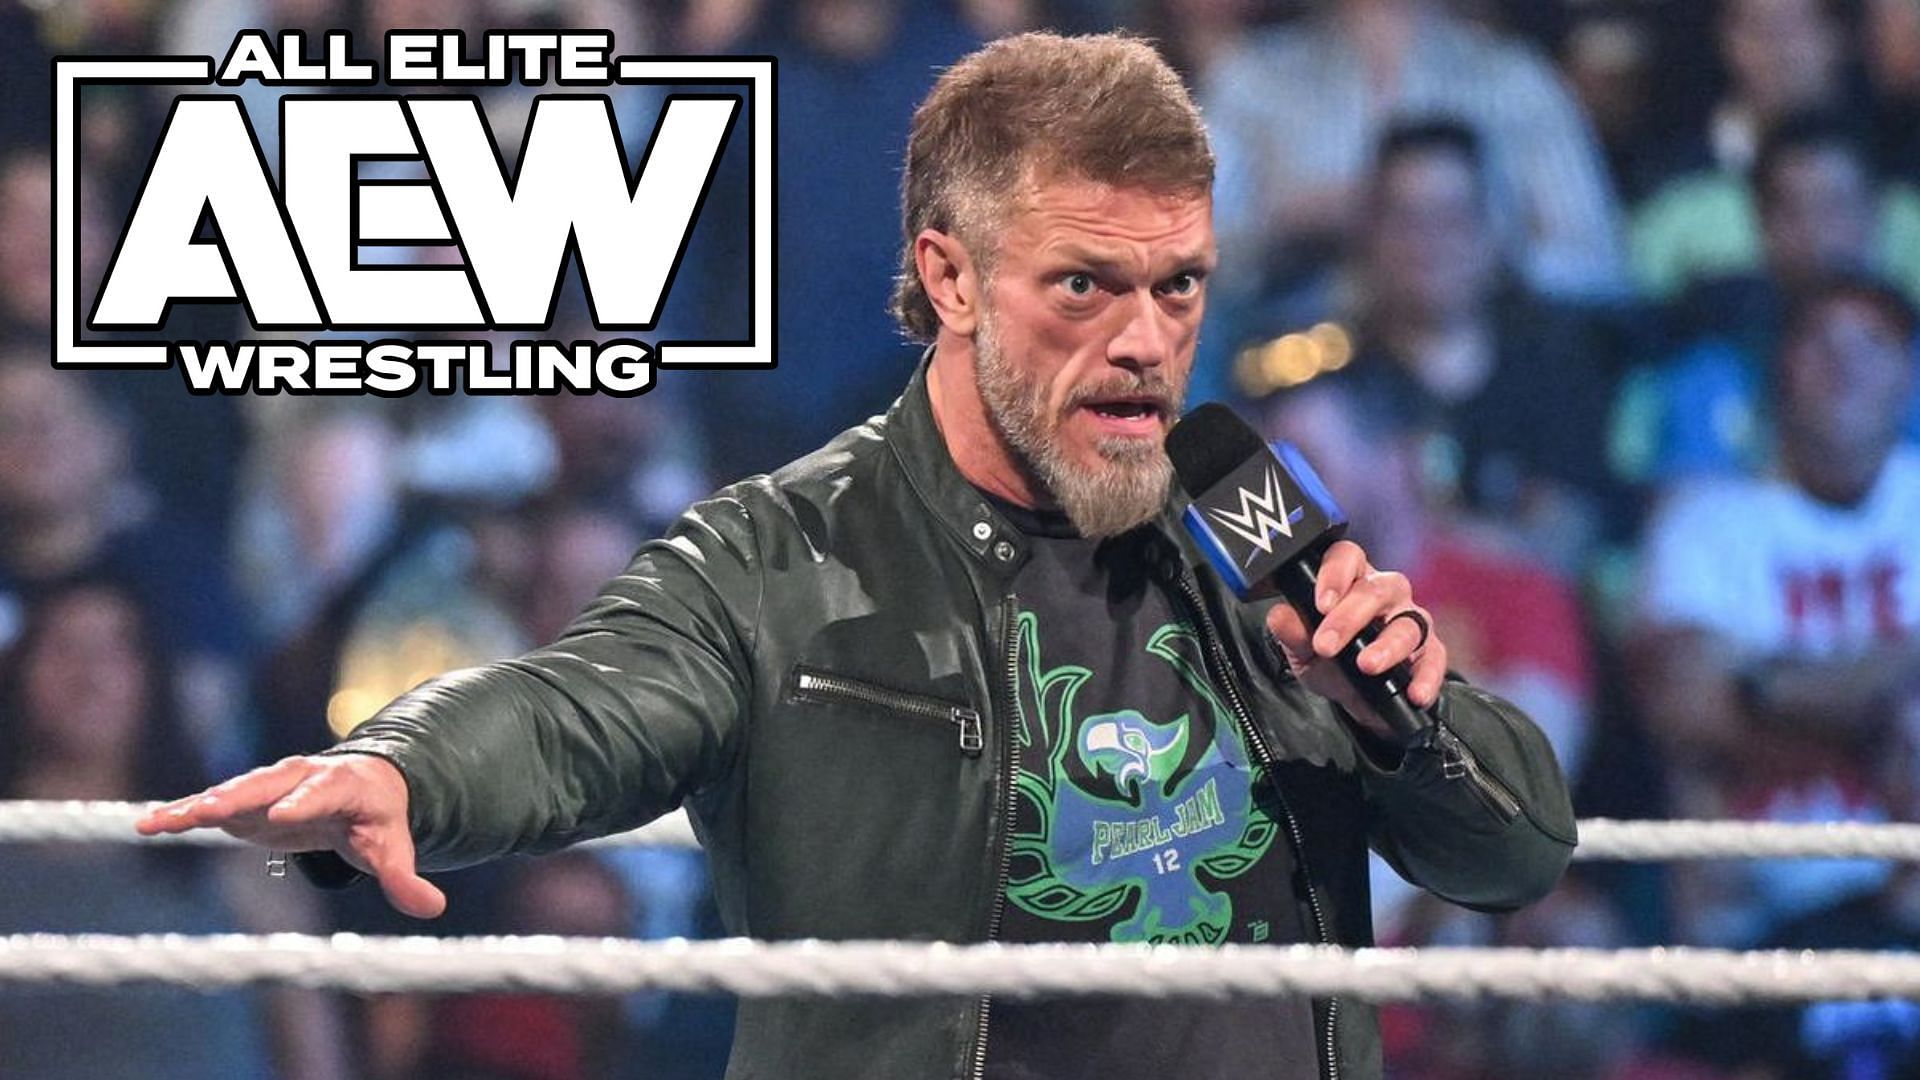 Would Edge get lost in the shuffle if he jumps to AEW?